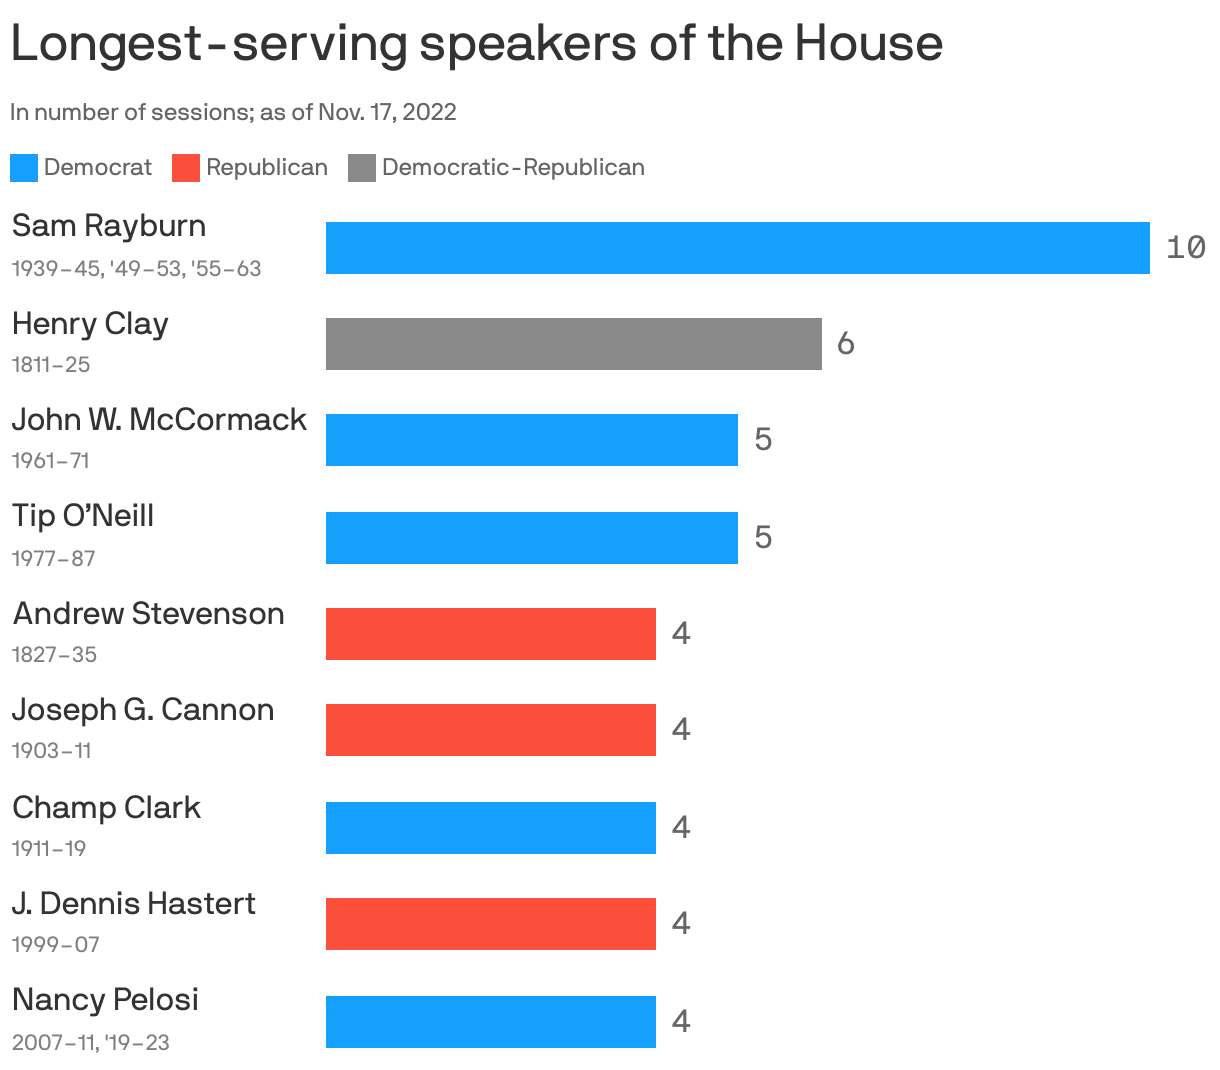 Longest-serving speakers of the House